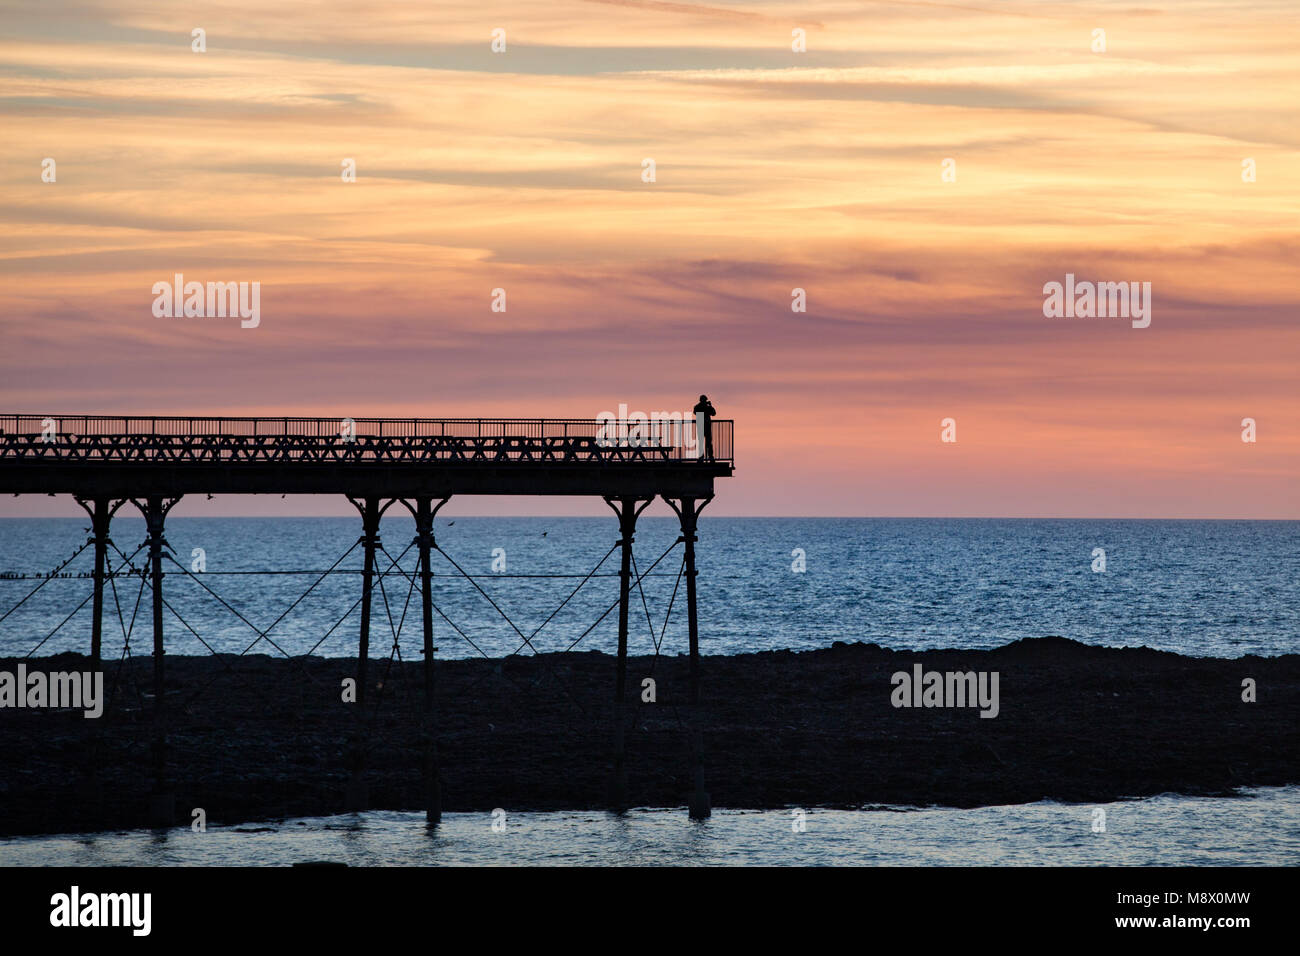 Aberystwyth, Wales. 20th Mar, 2018. UK Weather:A beautiful sunset dipping into Cardigan Bay signals the Spring (Vernal) Equinox at Aberystwyth on the mid Wales coast. Credit: atgof.co/Alamy Live News Stock Photo